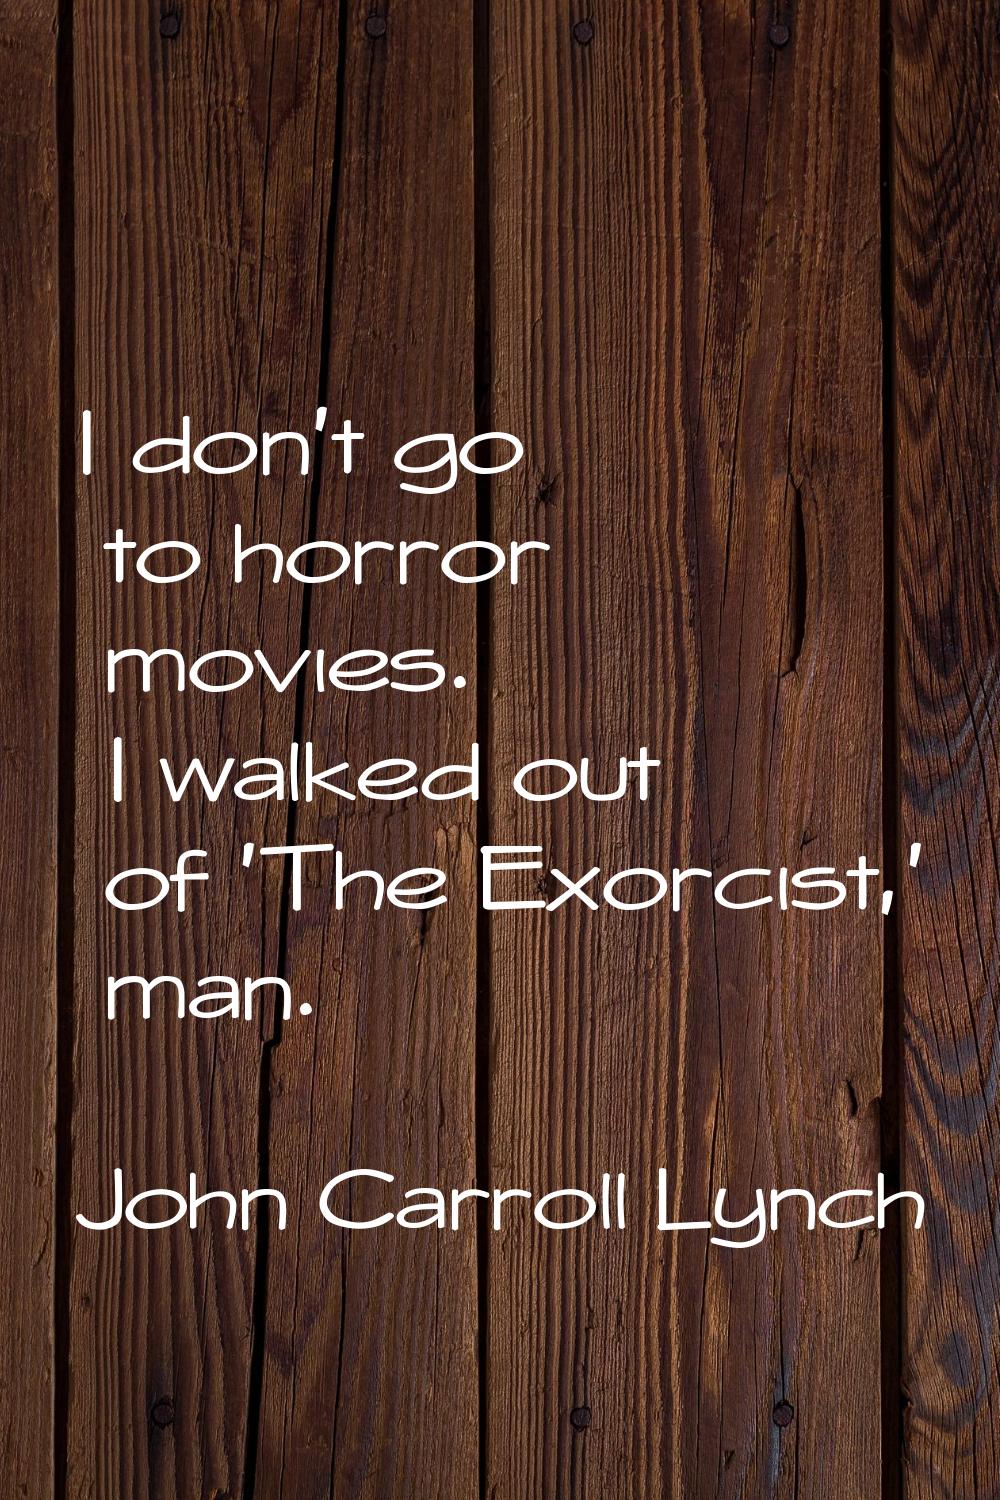 I don't go to horror movies. I walked out of 'The Exorcist,' man.